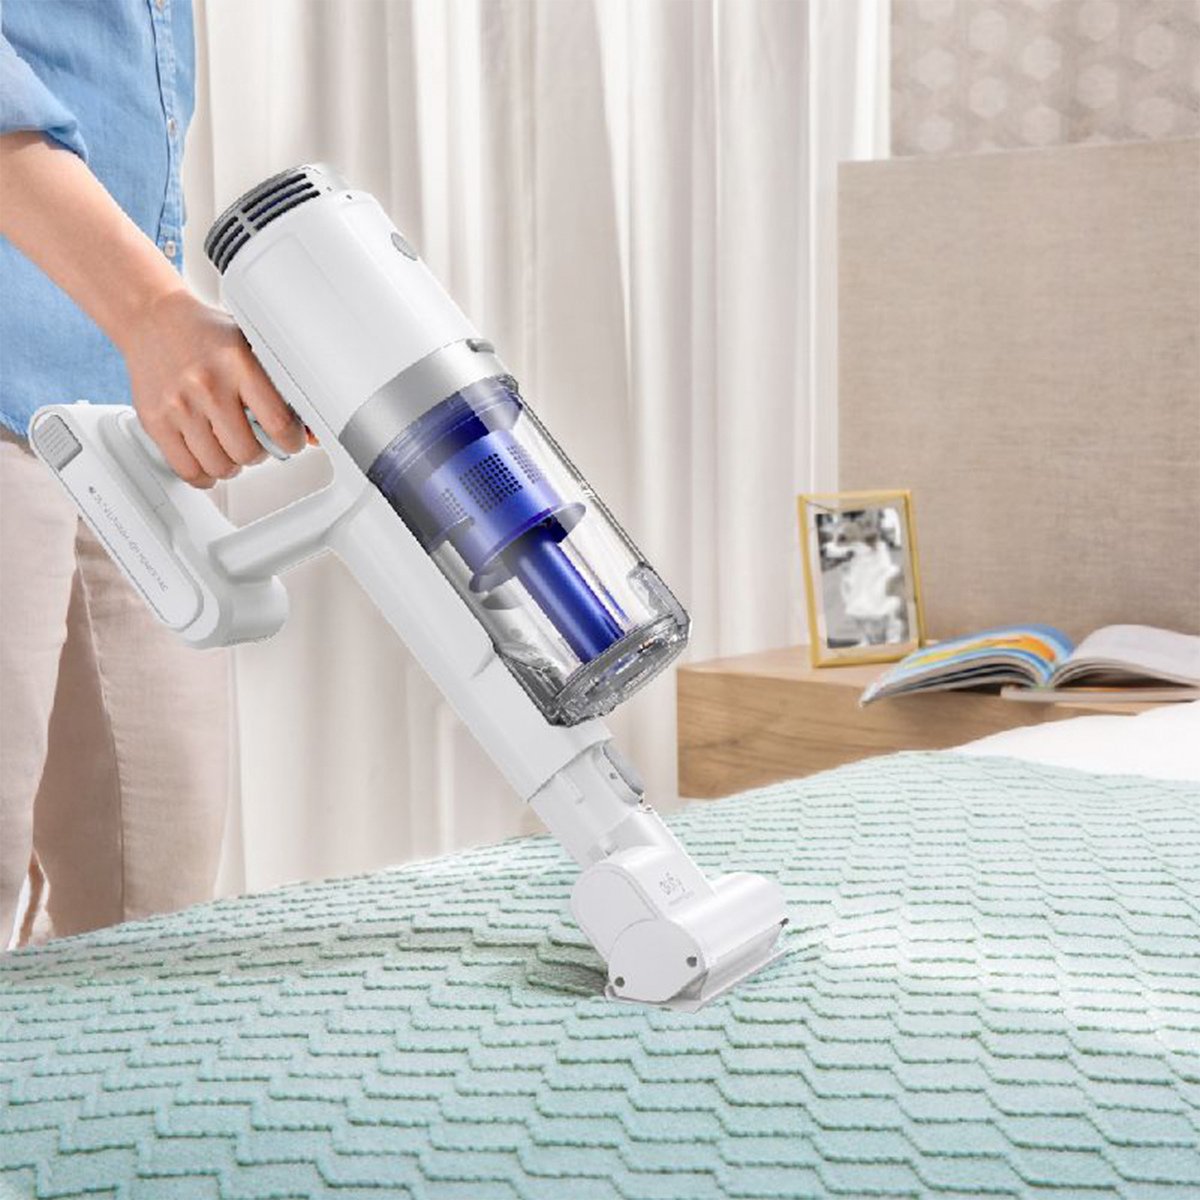 Eufy HomeVac S11 Go T2501K21,Cordless Stick-Vacuum Cleaner, Lightweight, Cordless, 120AW Suction Power, Detachable Battery, Deep Clean Carpet to Hard Floor